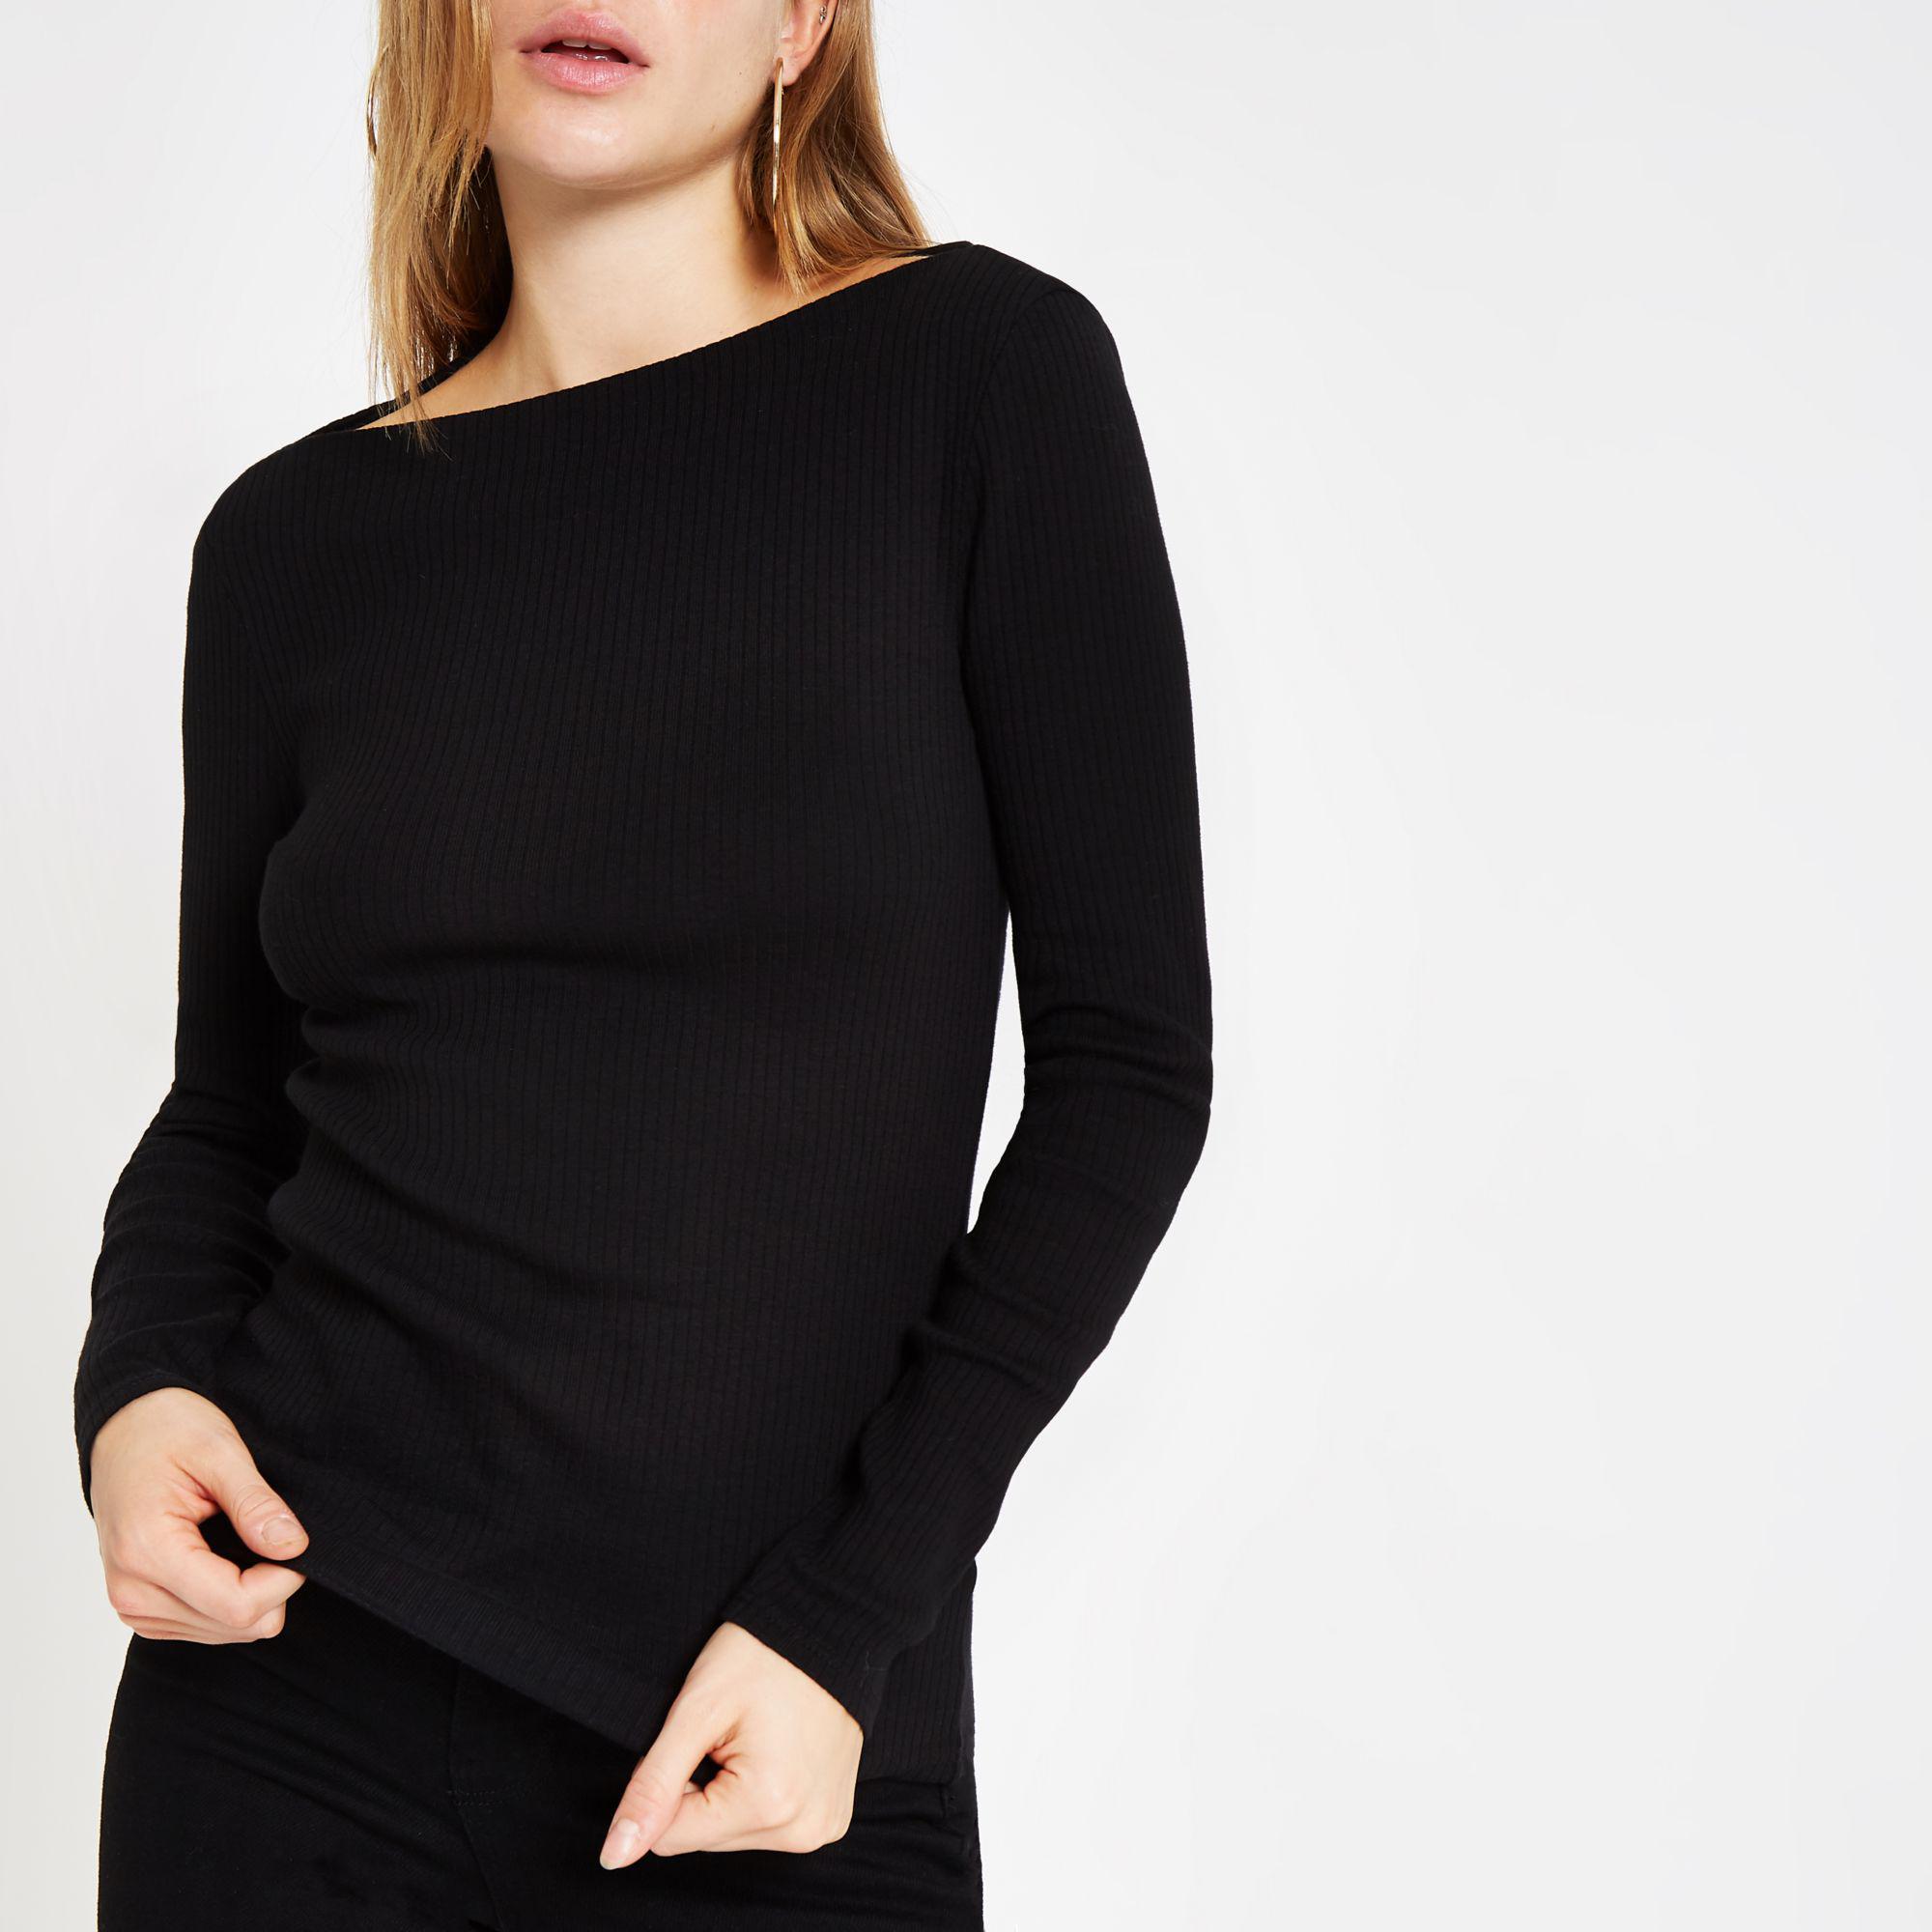 Lyst - River Island Ribbed Boat Neck Long Sleeve Top in Black